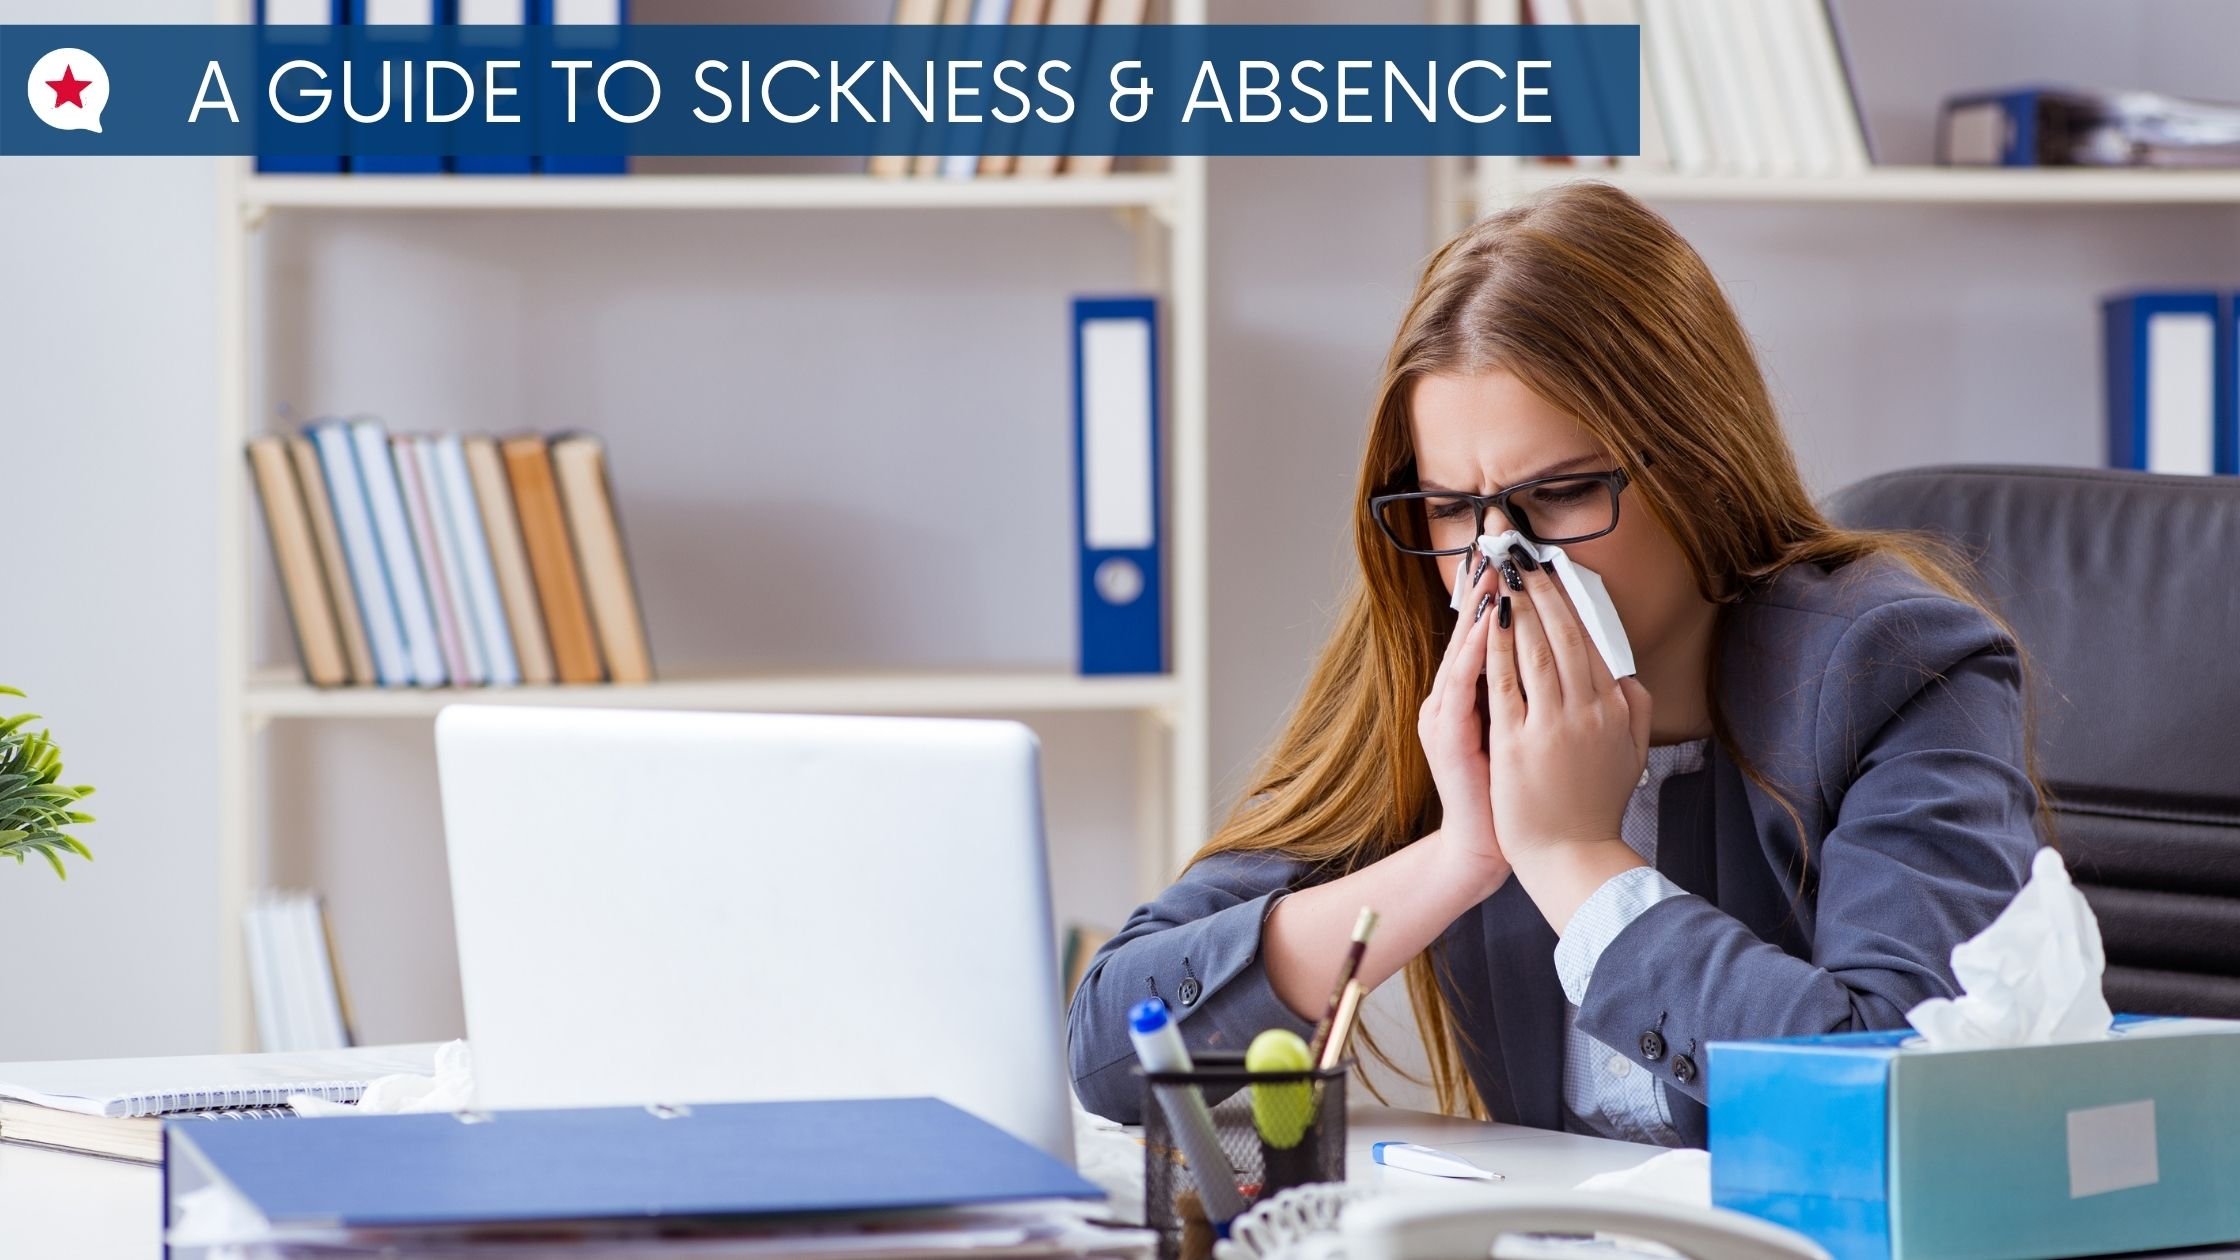 Guide to Sickness & Absence Landing Page image-1